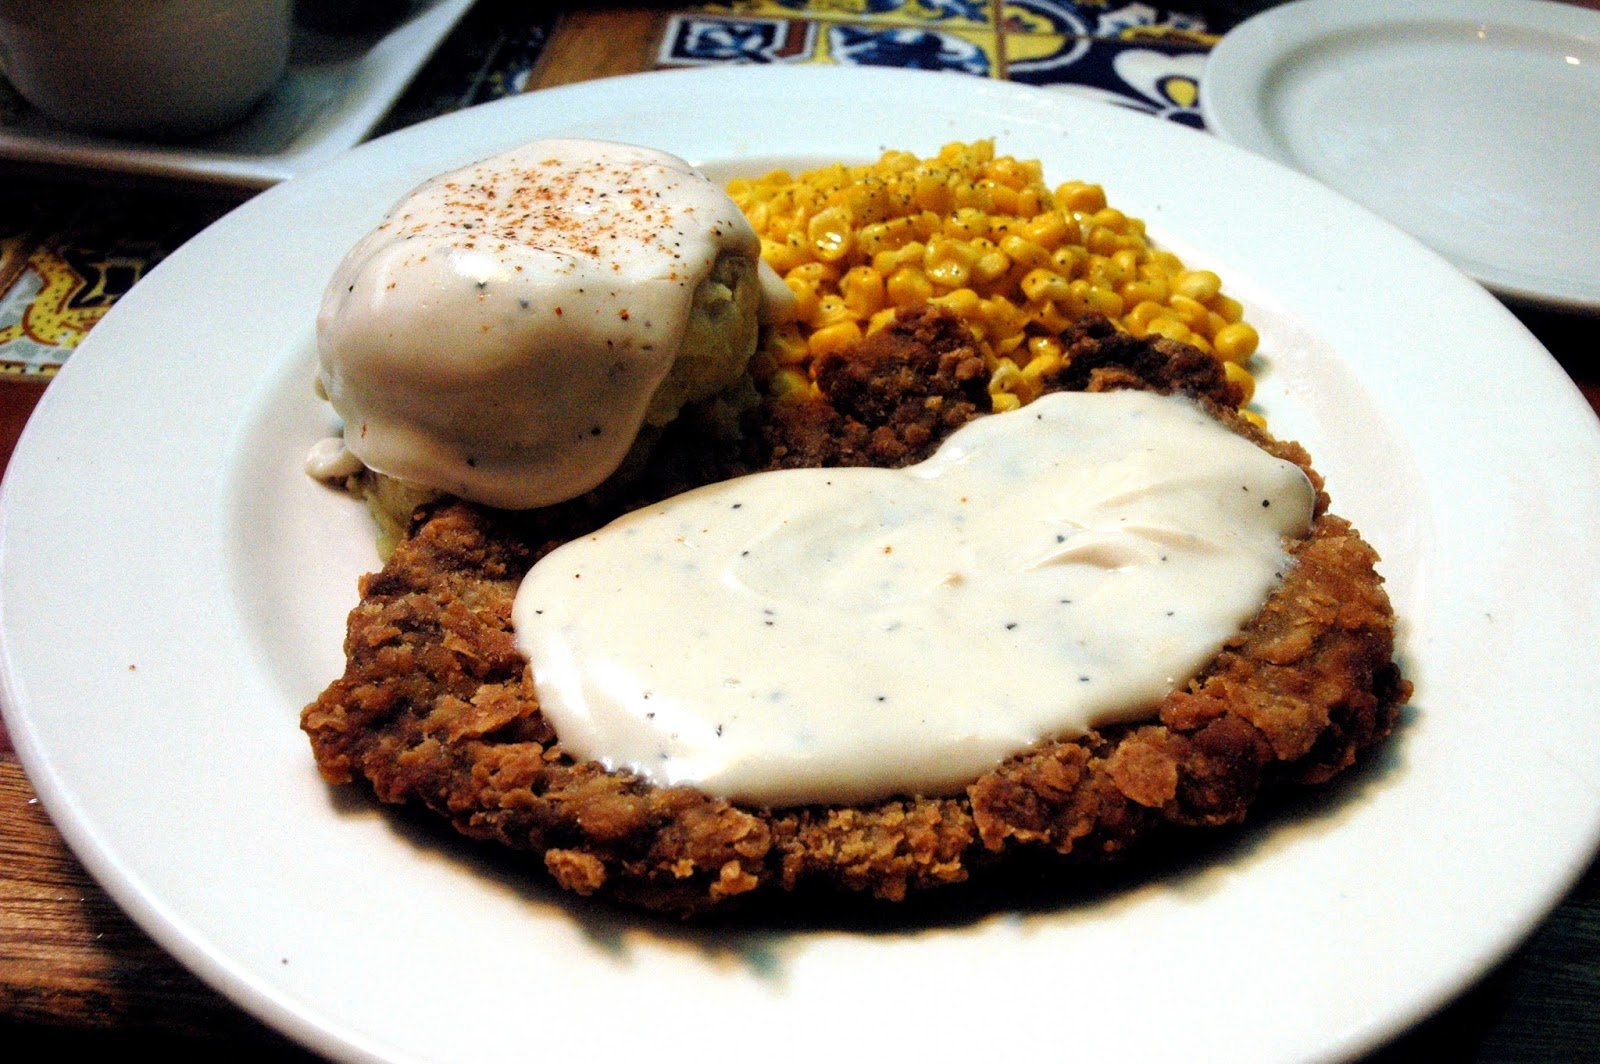 DUDE FOR FOOD: Time For Some Country Fried Steak...at Chili